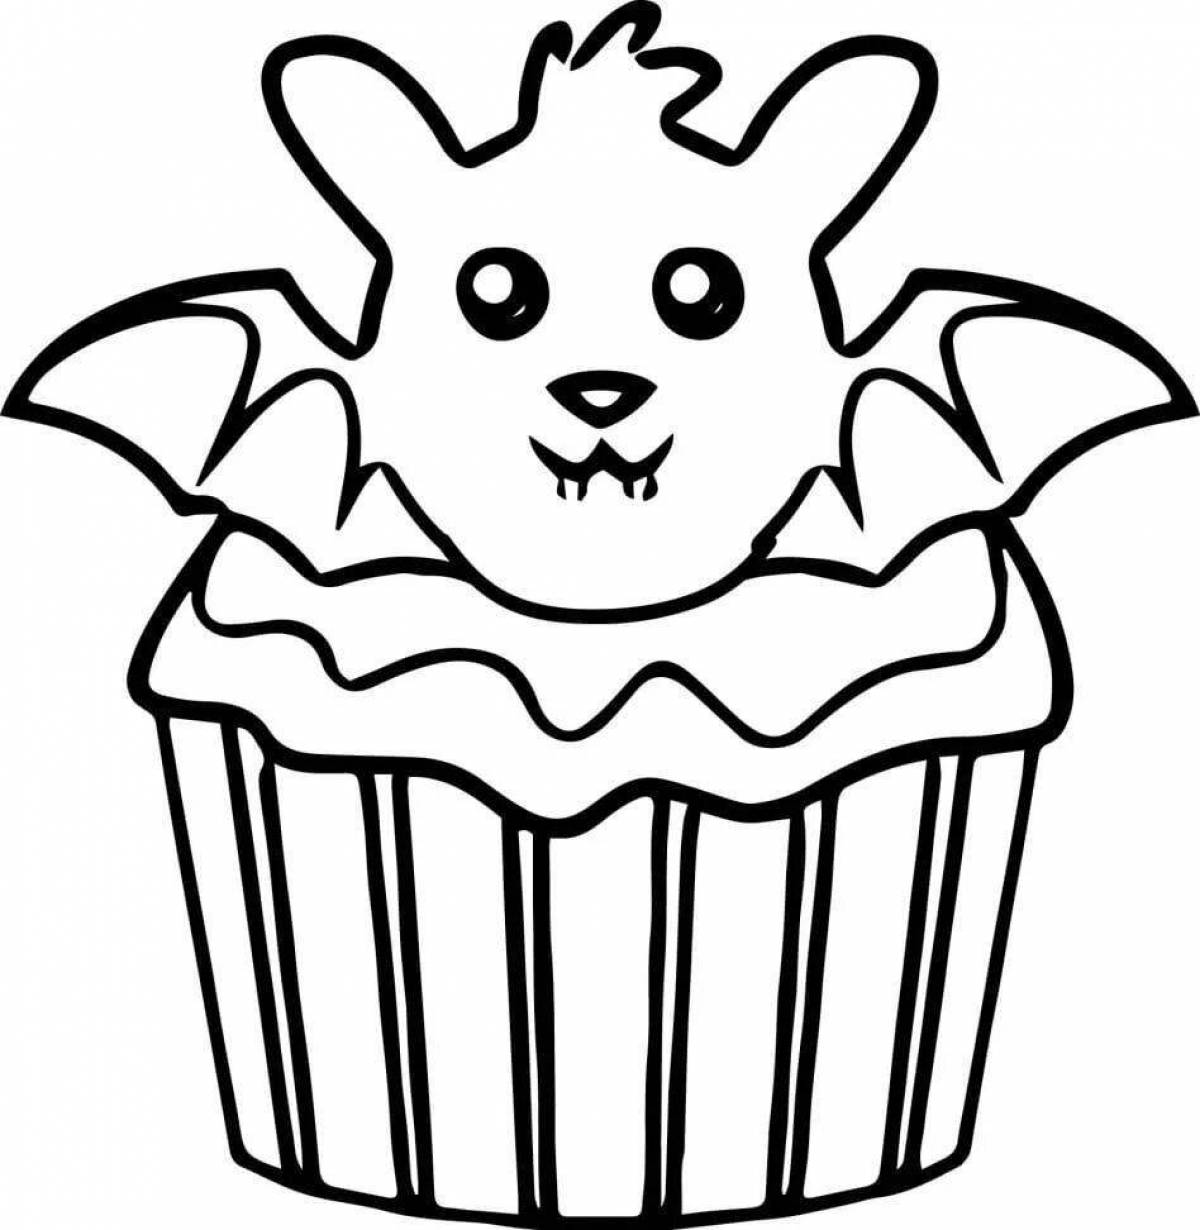 Excited cupcakes coloring page for kids